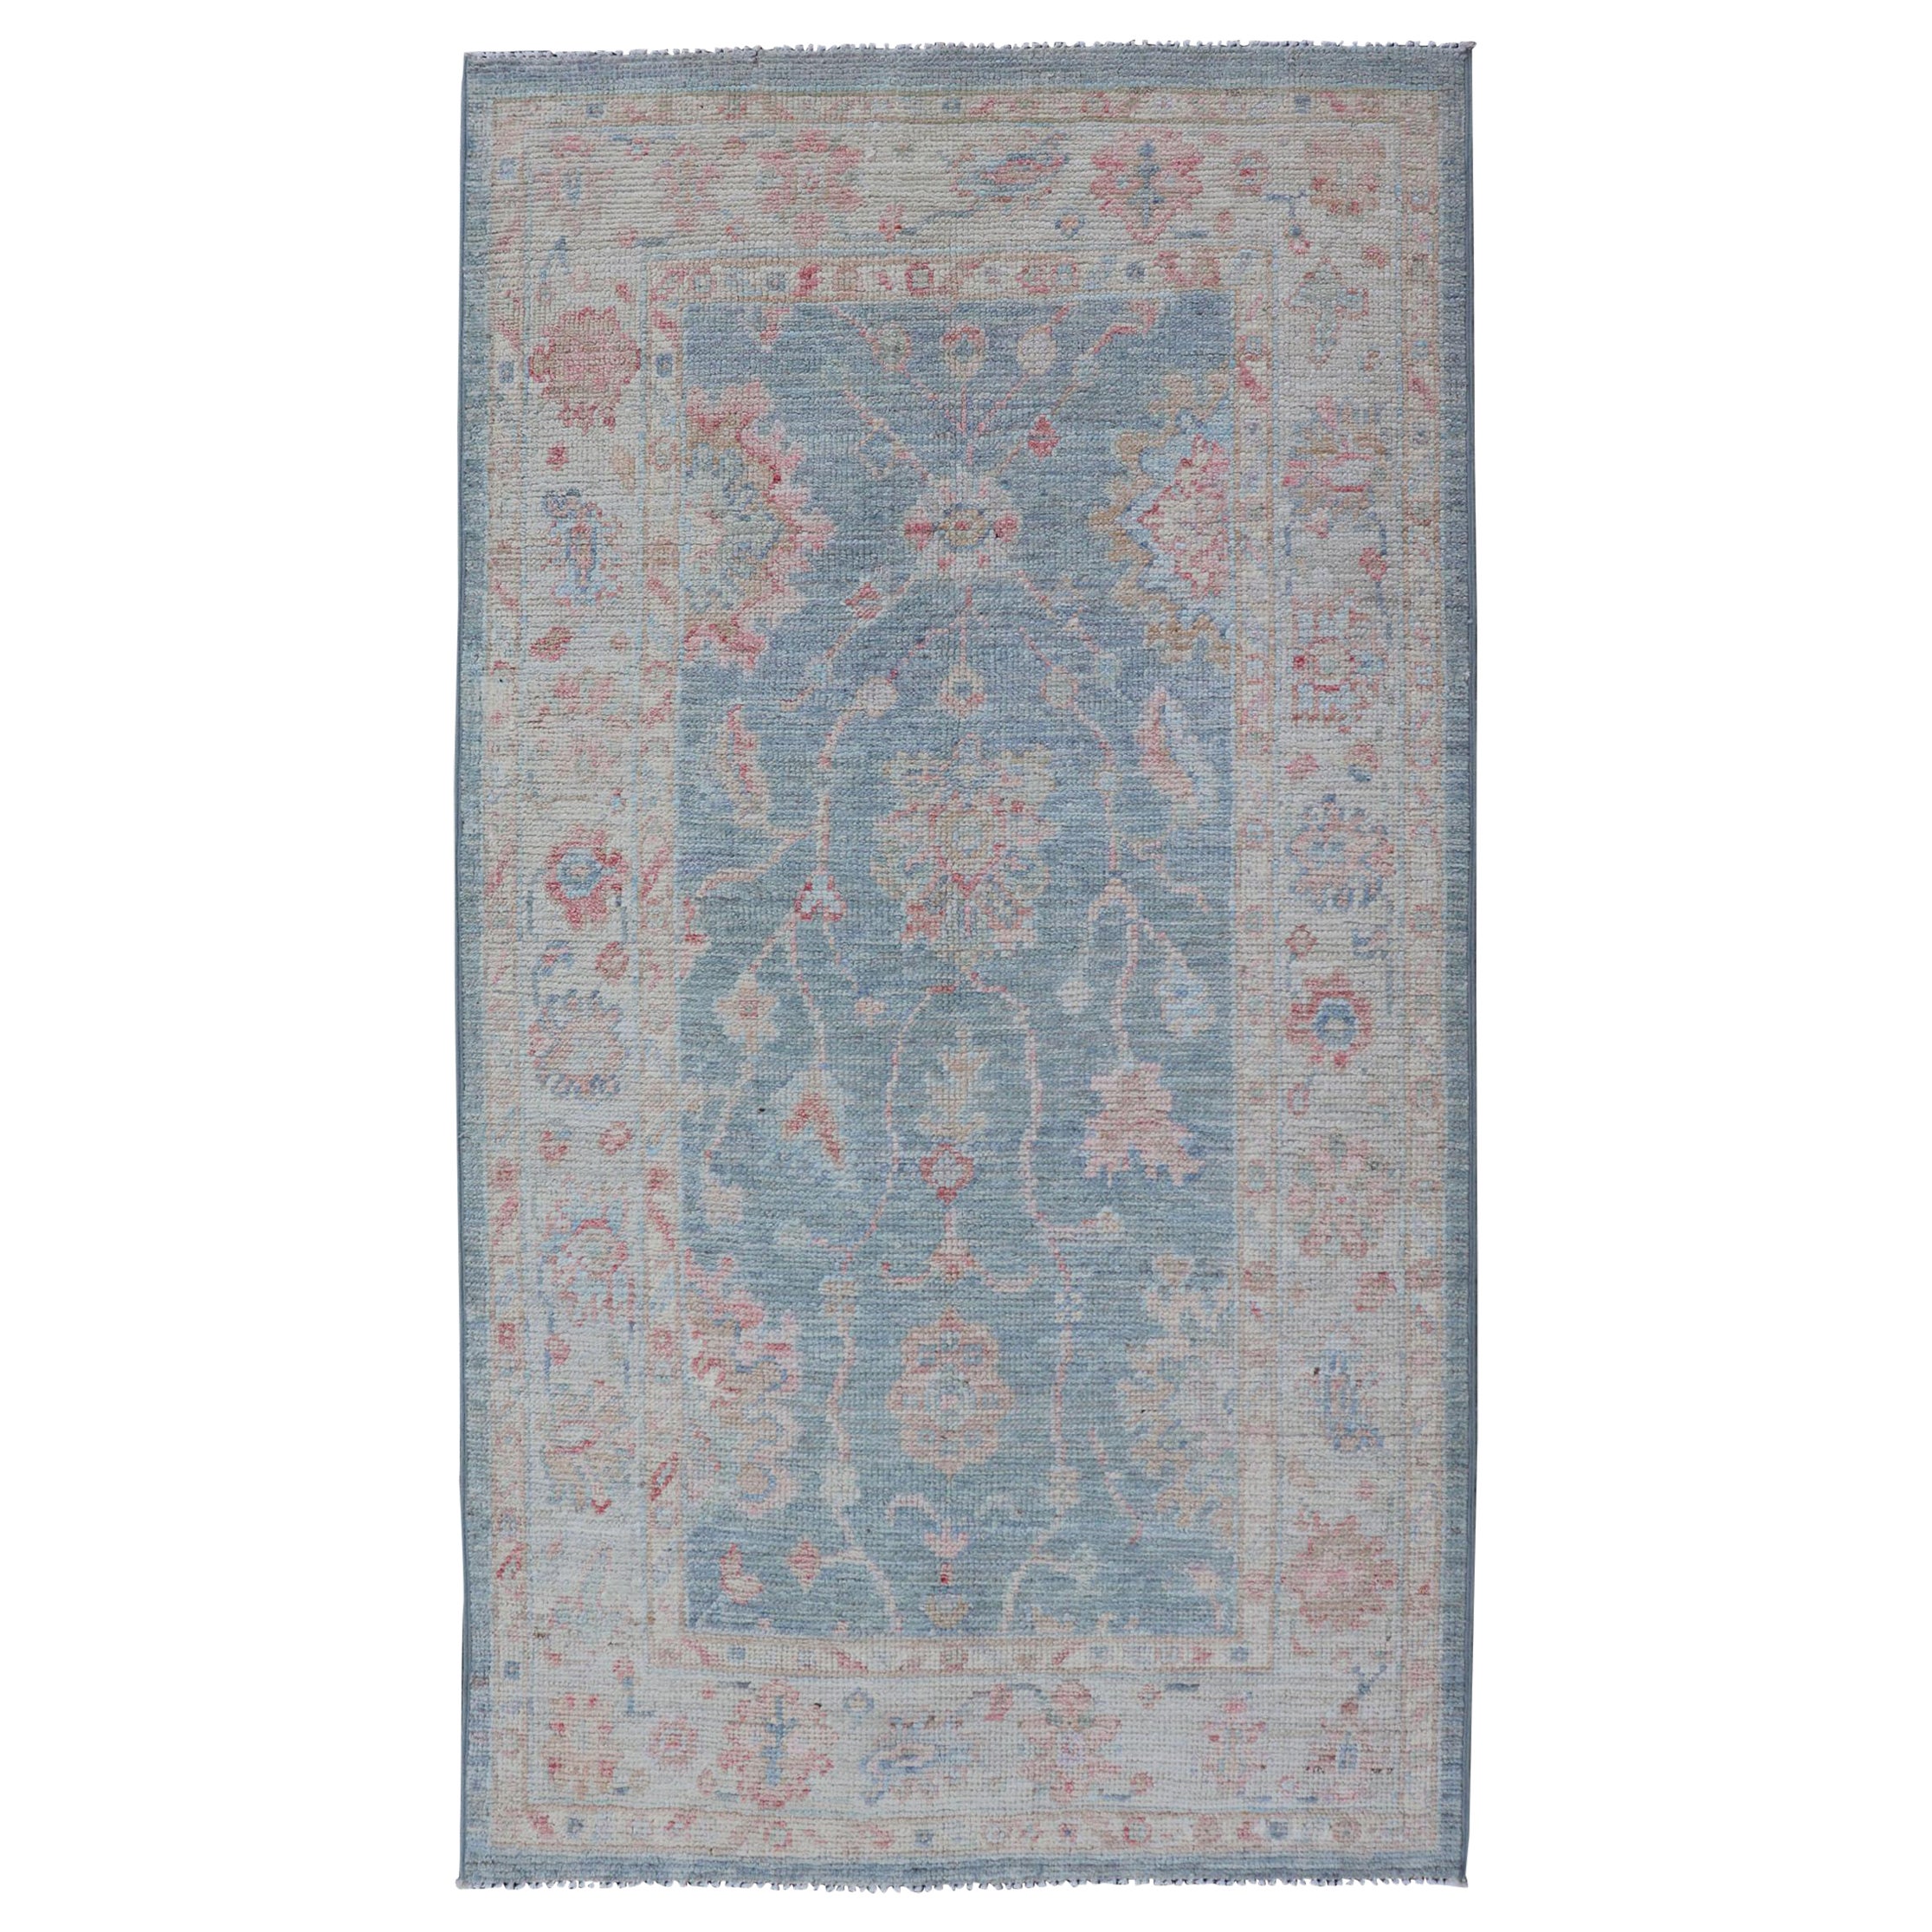 Modern Oushak Rug with a Light Blue Field With All-Over Floral Motifs With Cream